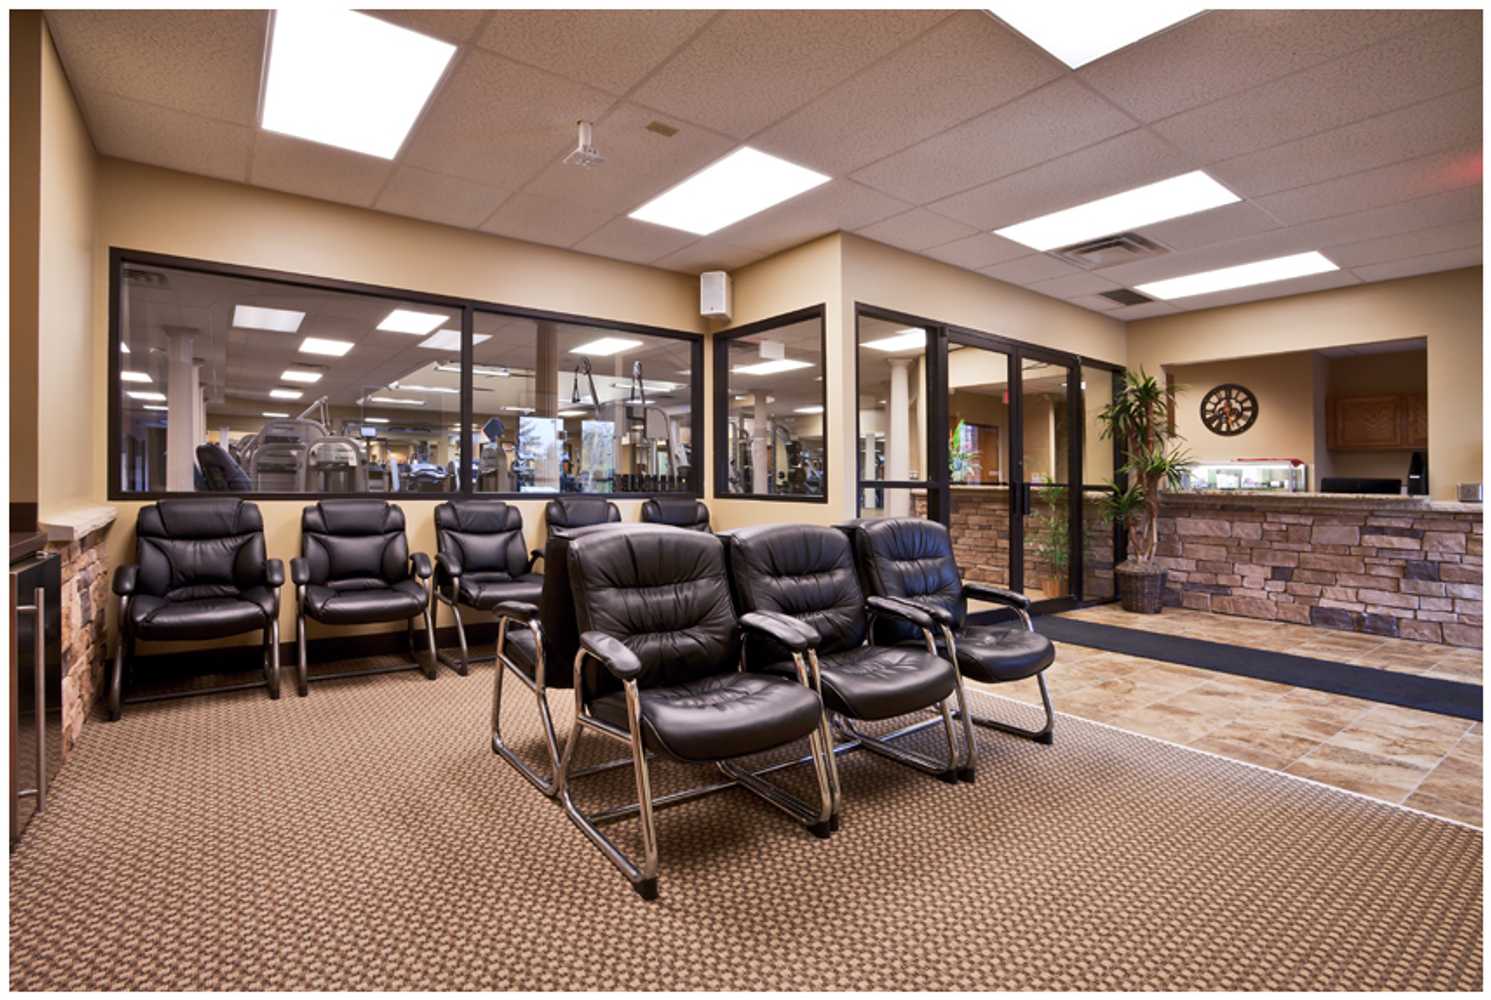 Physical Therapy Facility - Richard Cavender, M.D